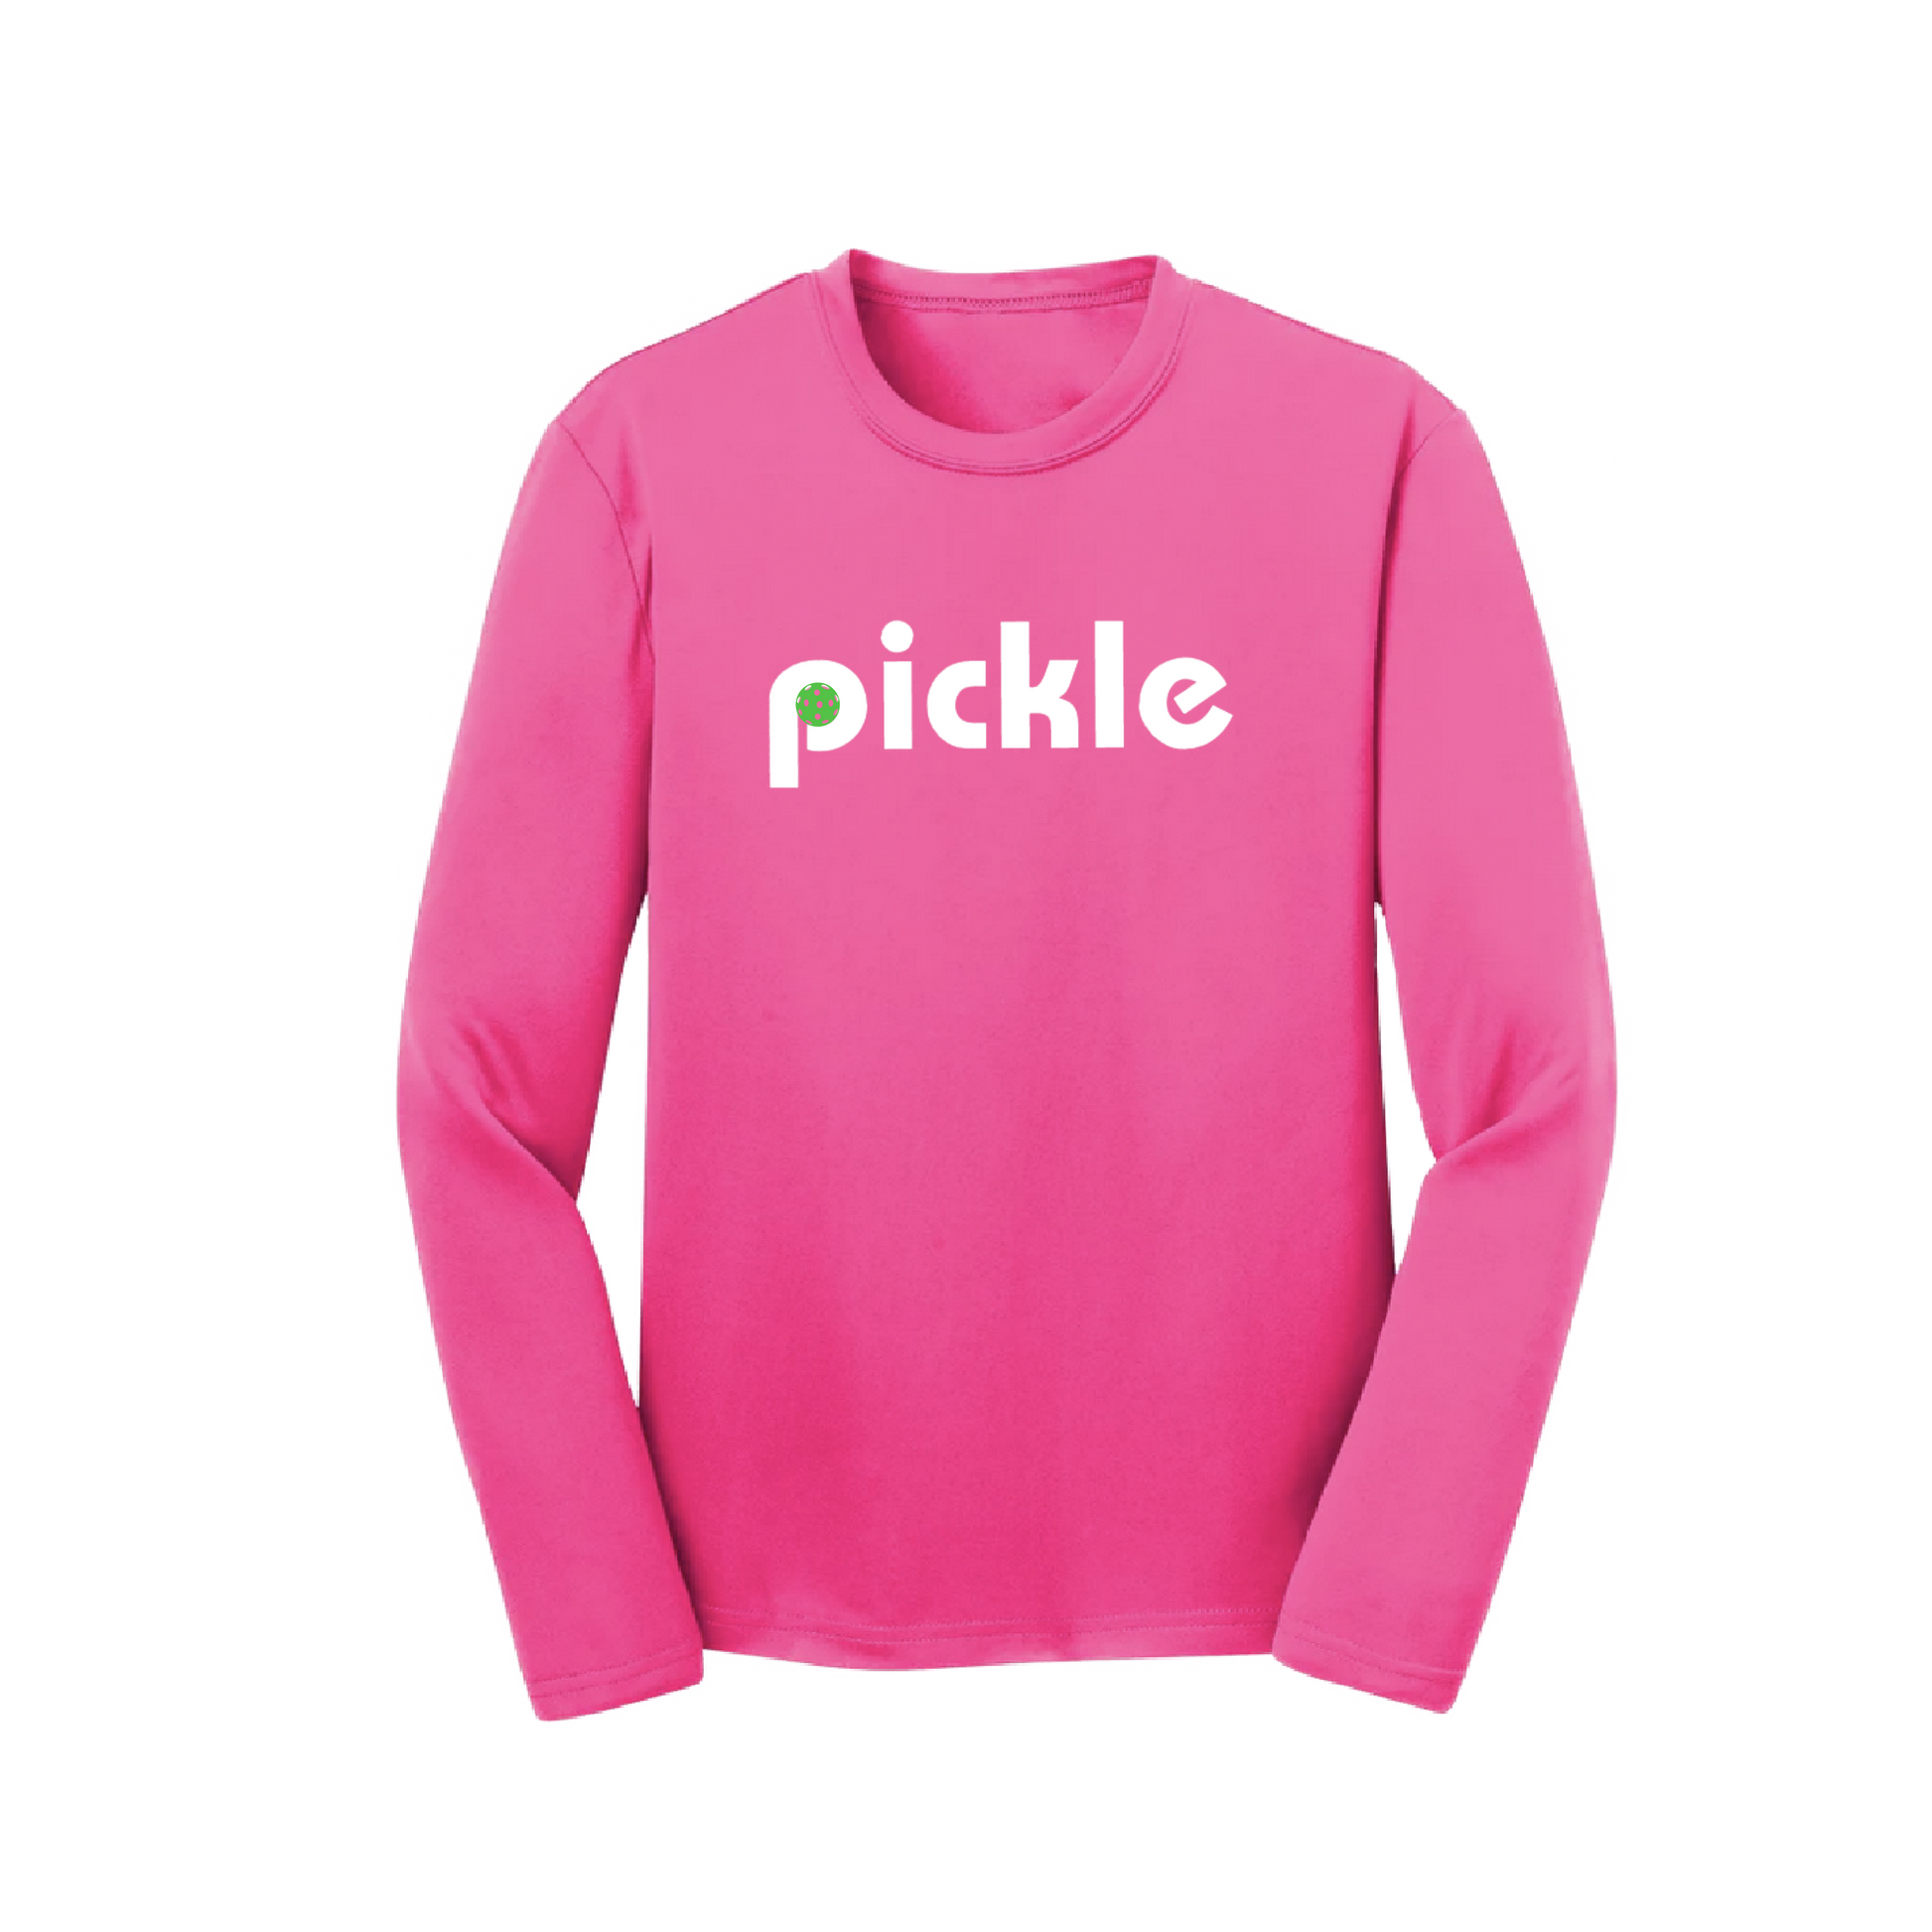 Feel the difference with Pickleball shirts! Crafted for excellence and breathability, these moisture-wicking styles feature PosiCharge tech to lock in color and prevent logos from fading. Enjoy lightweight, roomy comfort with removable tags and set-in sleeves.